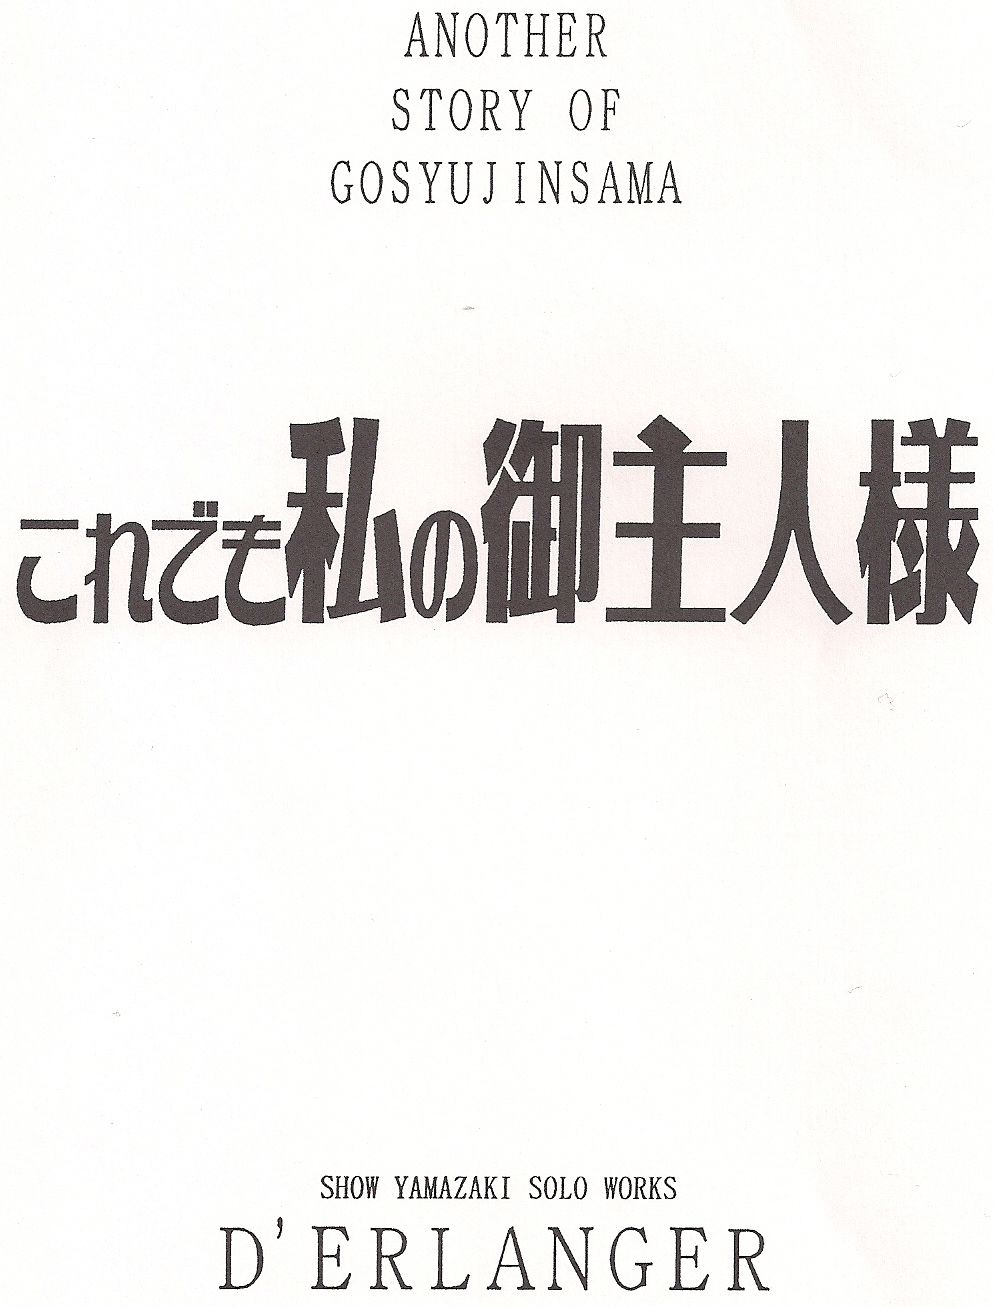 He is My Master-Another Story of Gosyujinsama Zero Point Five 